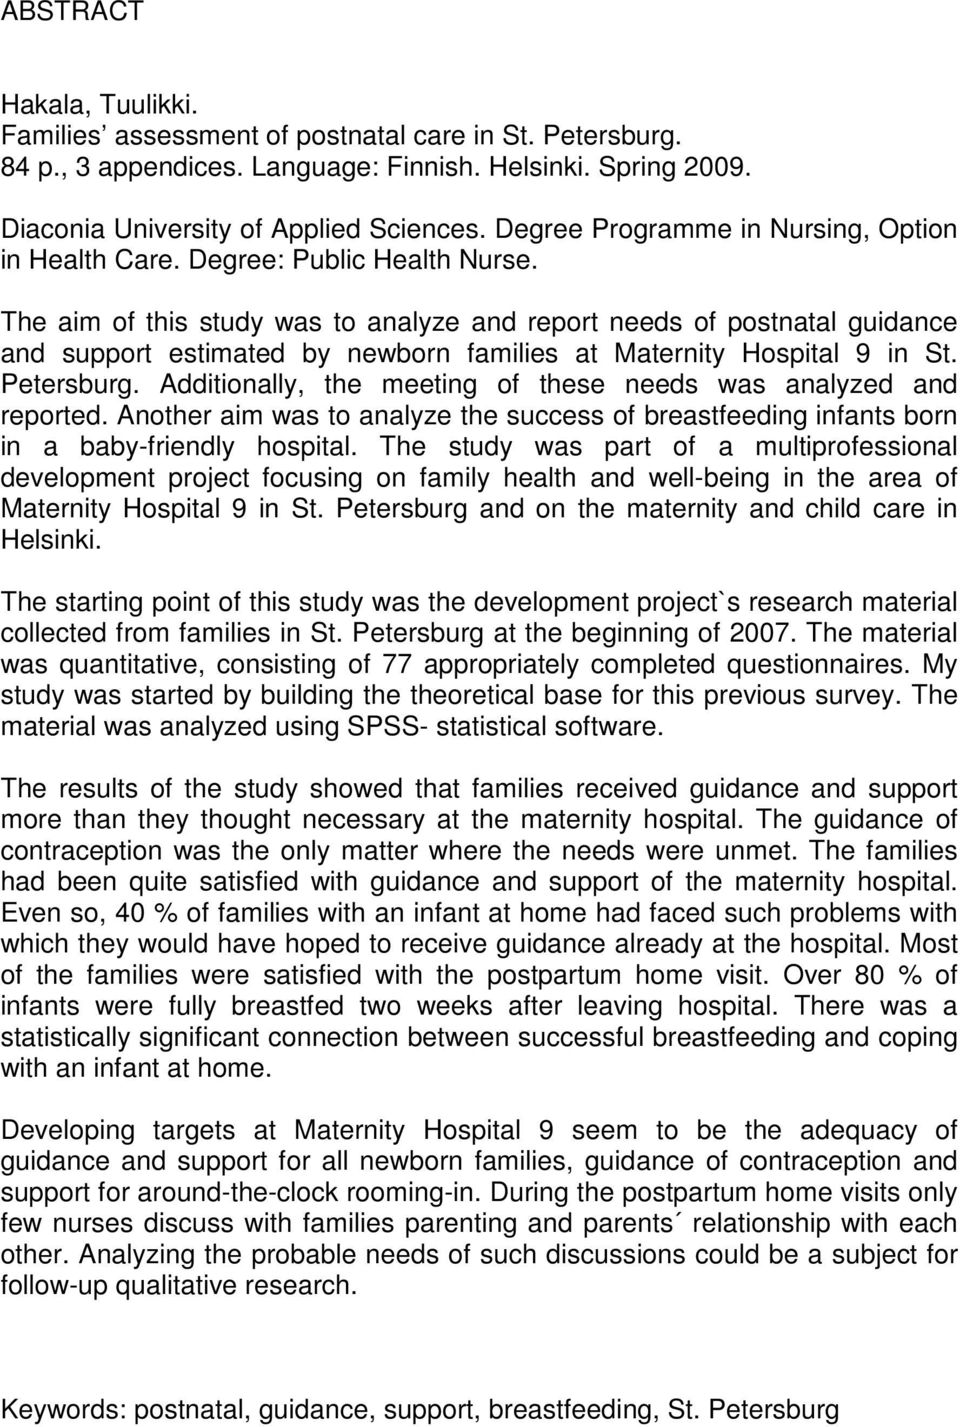 The aim of this study was to analyze and report needs of postnatal guidance and support estimated by newborn families at Maternity Hospital 9 in St. Petersburg.